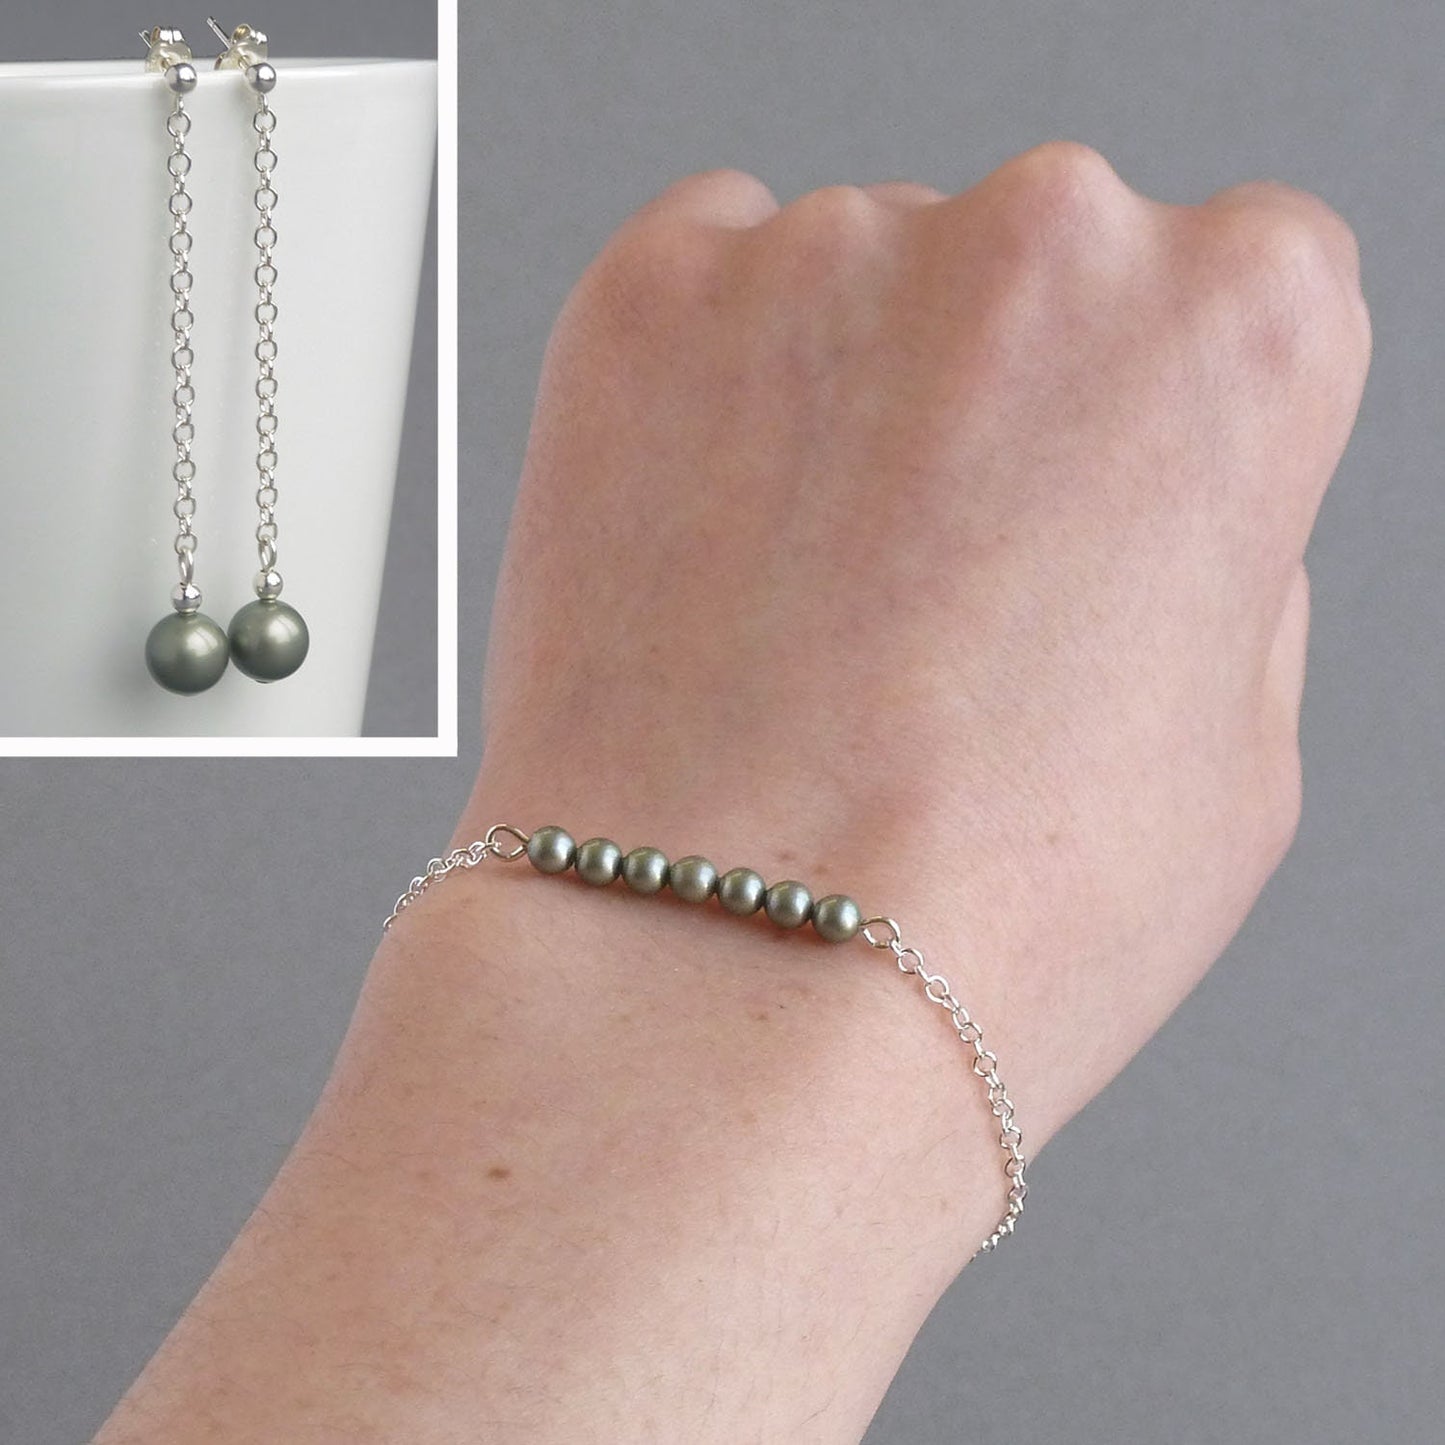 Sage Green Pearl Layering Bracelet - Dainty, Chain and Dusty Green, Pearl Bar Bracelets